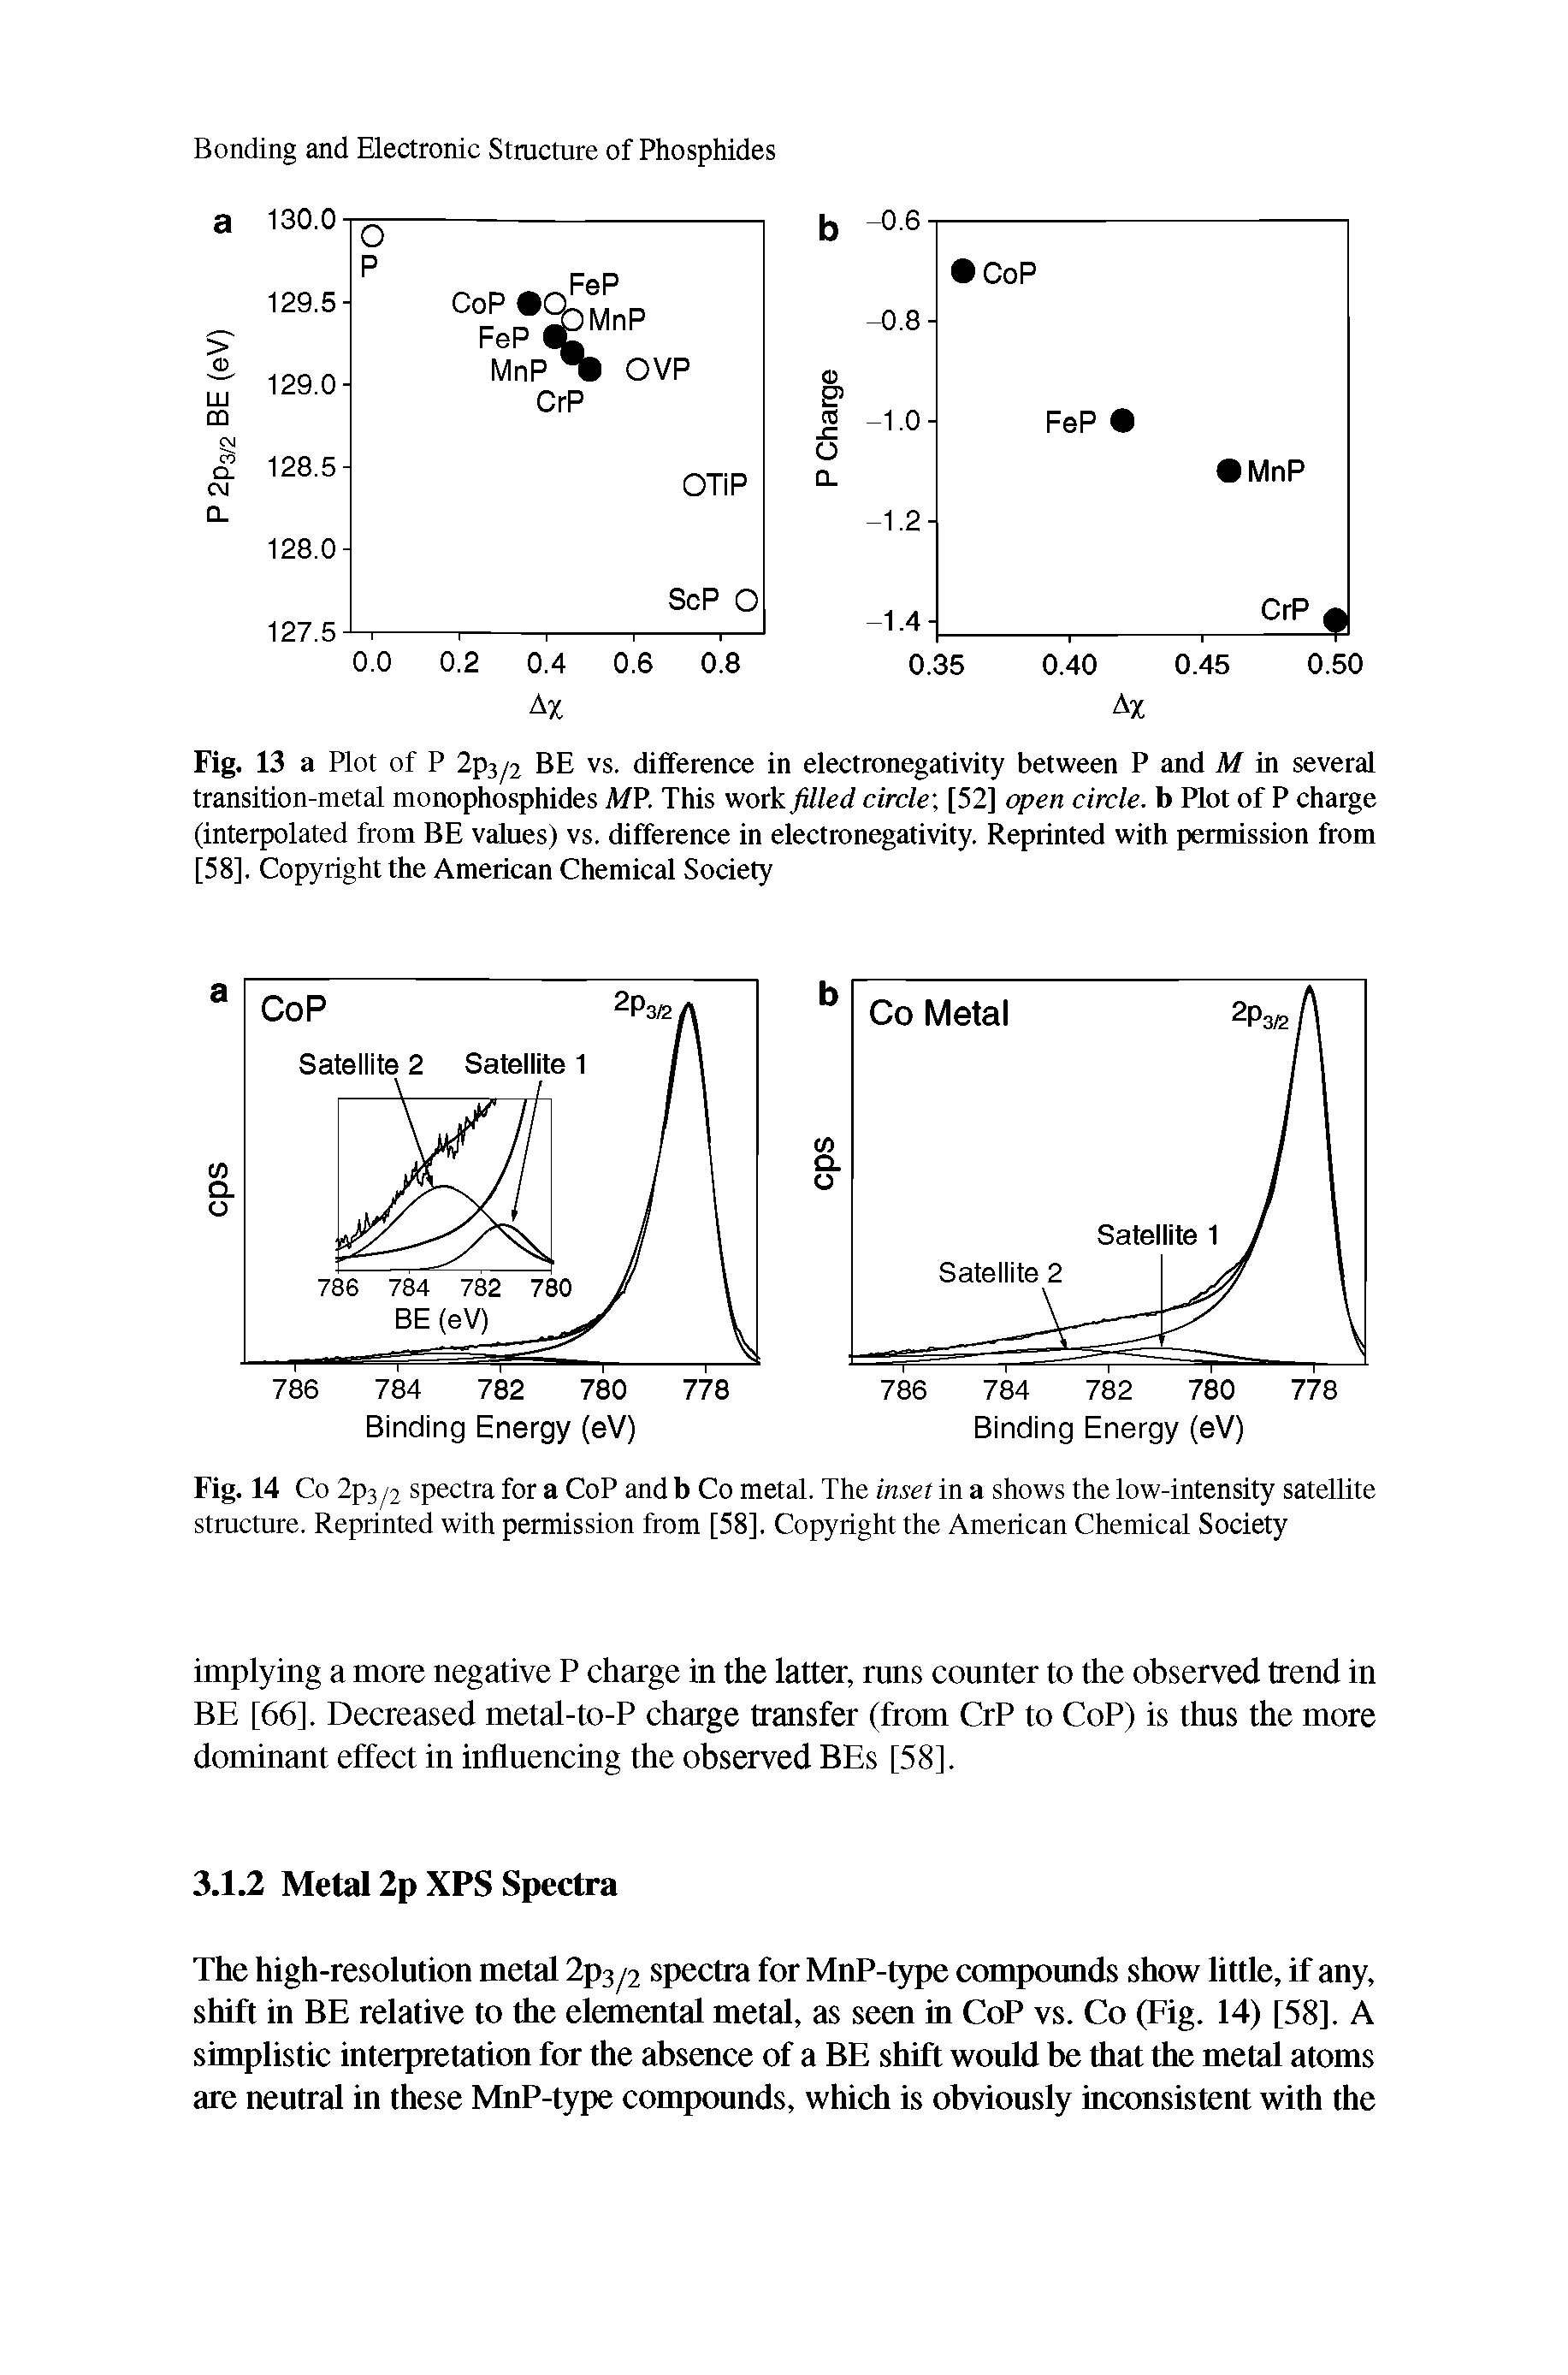 Fig. 14 Co 2p3 j2 spectra for a CoP and b Co metal. The inset in a shows the low-intensity satellite structure. Reprinted with permission from [58], Copyright the American Chemical Society...